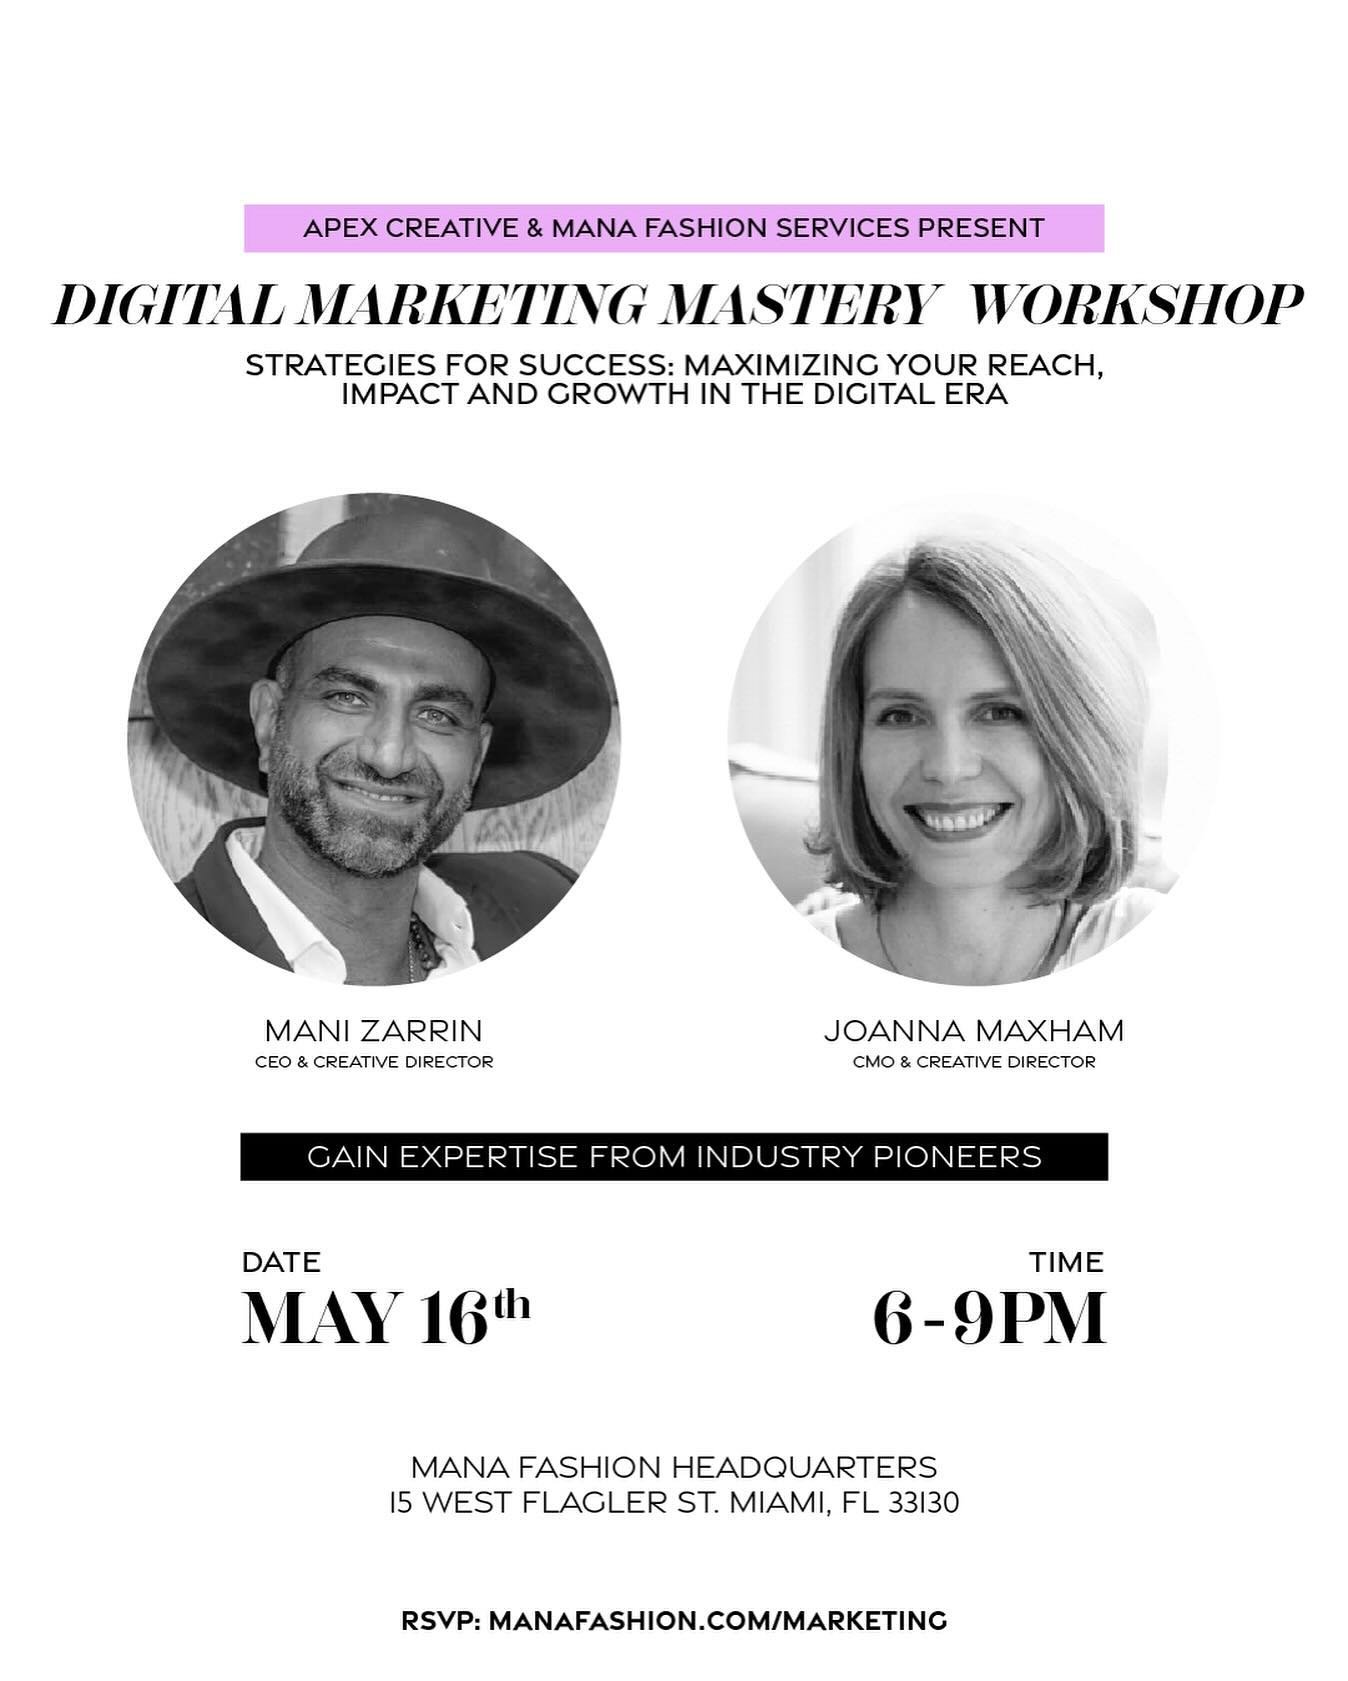 We have exciting News!🥁 Join us for an exclusive workshop featuring industry experts @joasiamaxham and @manizarrin from Apex Creative. They will be diving into marketing campaigns with invaluable strategies across social media ads, Google ads, and e